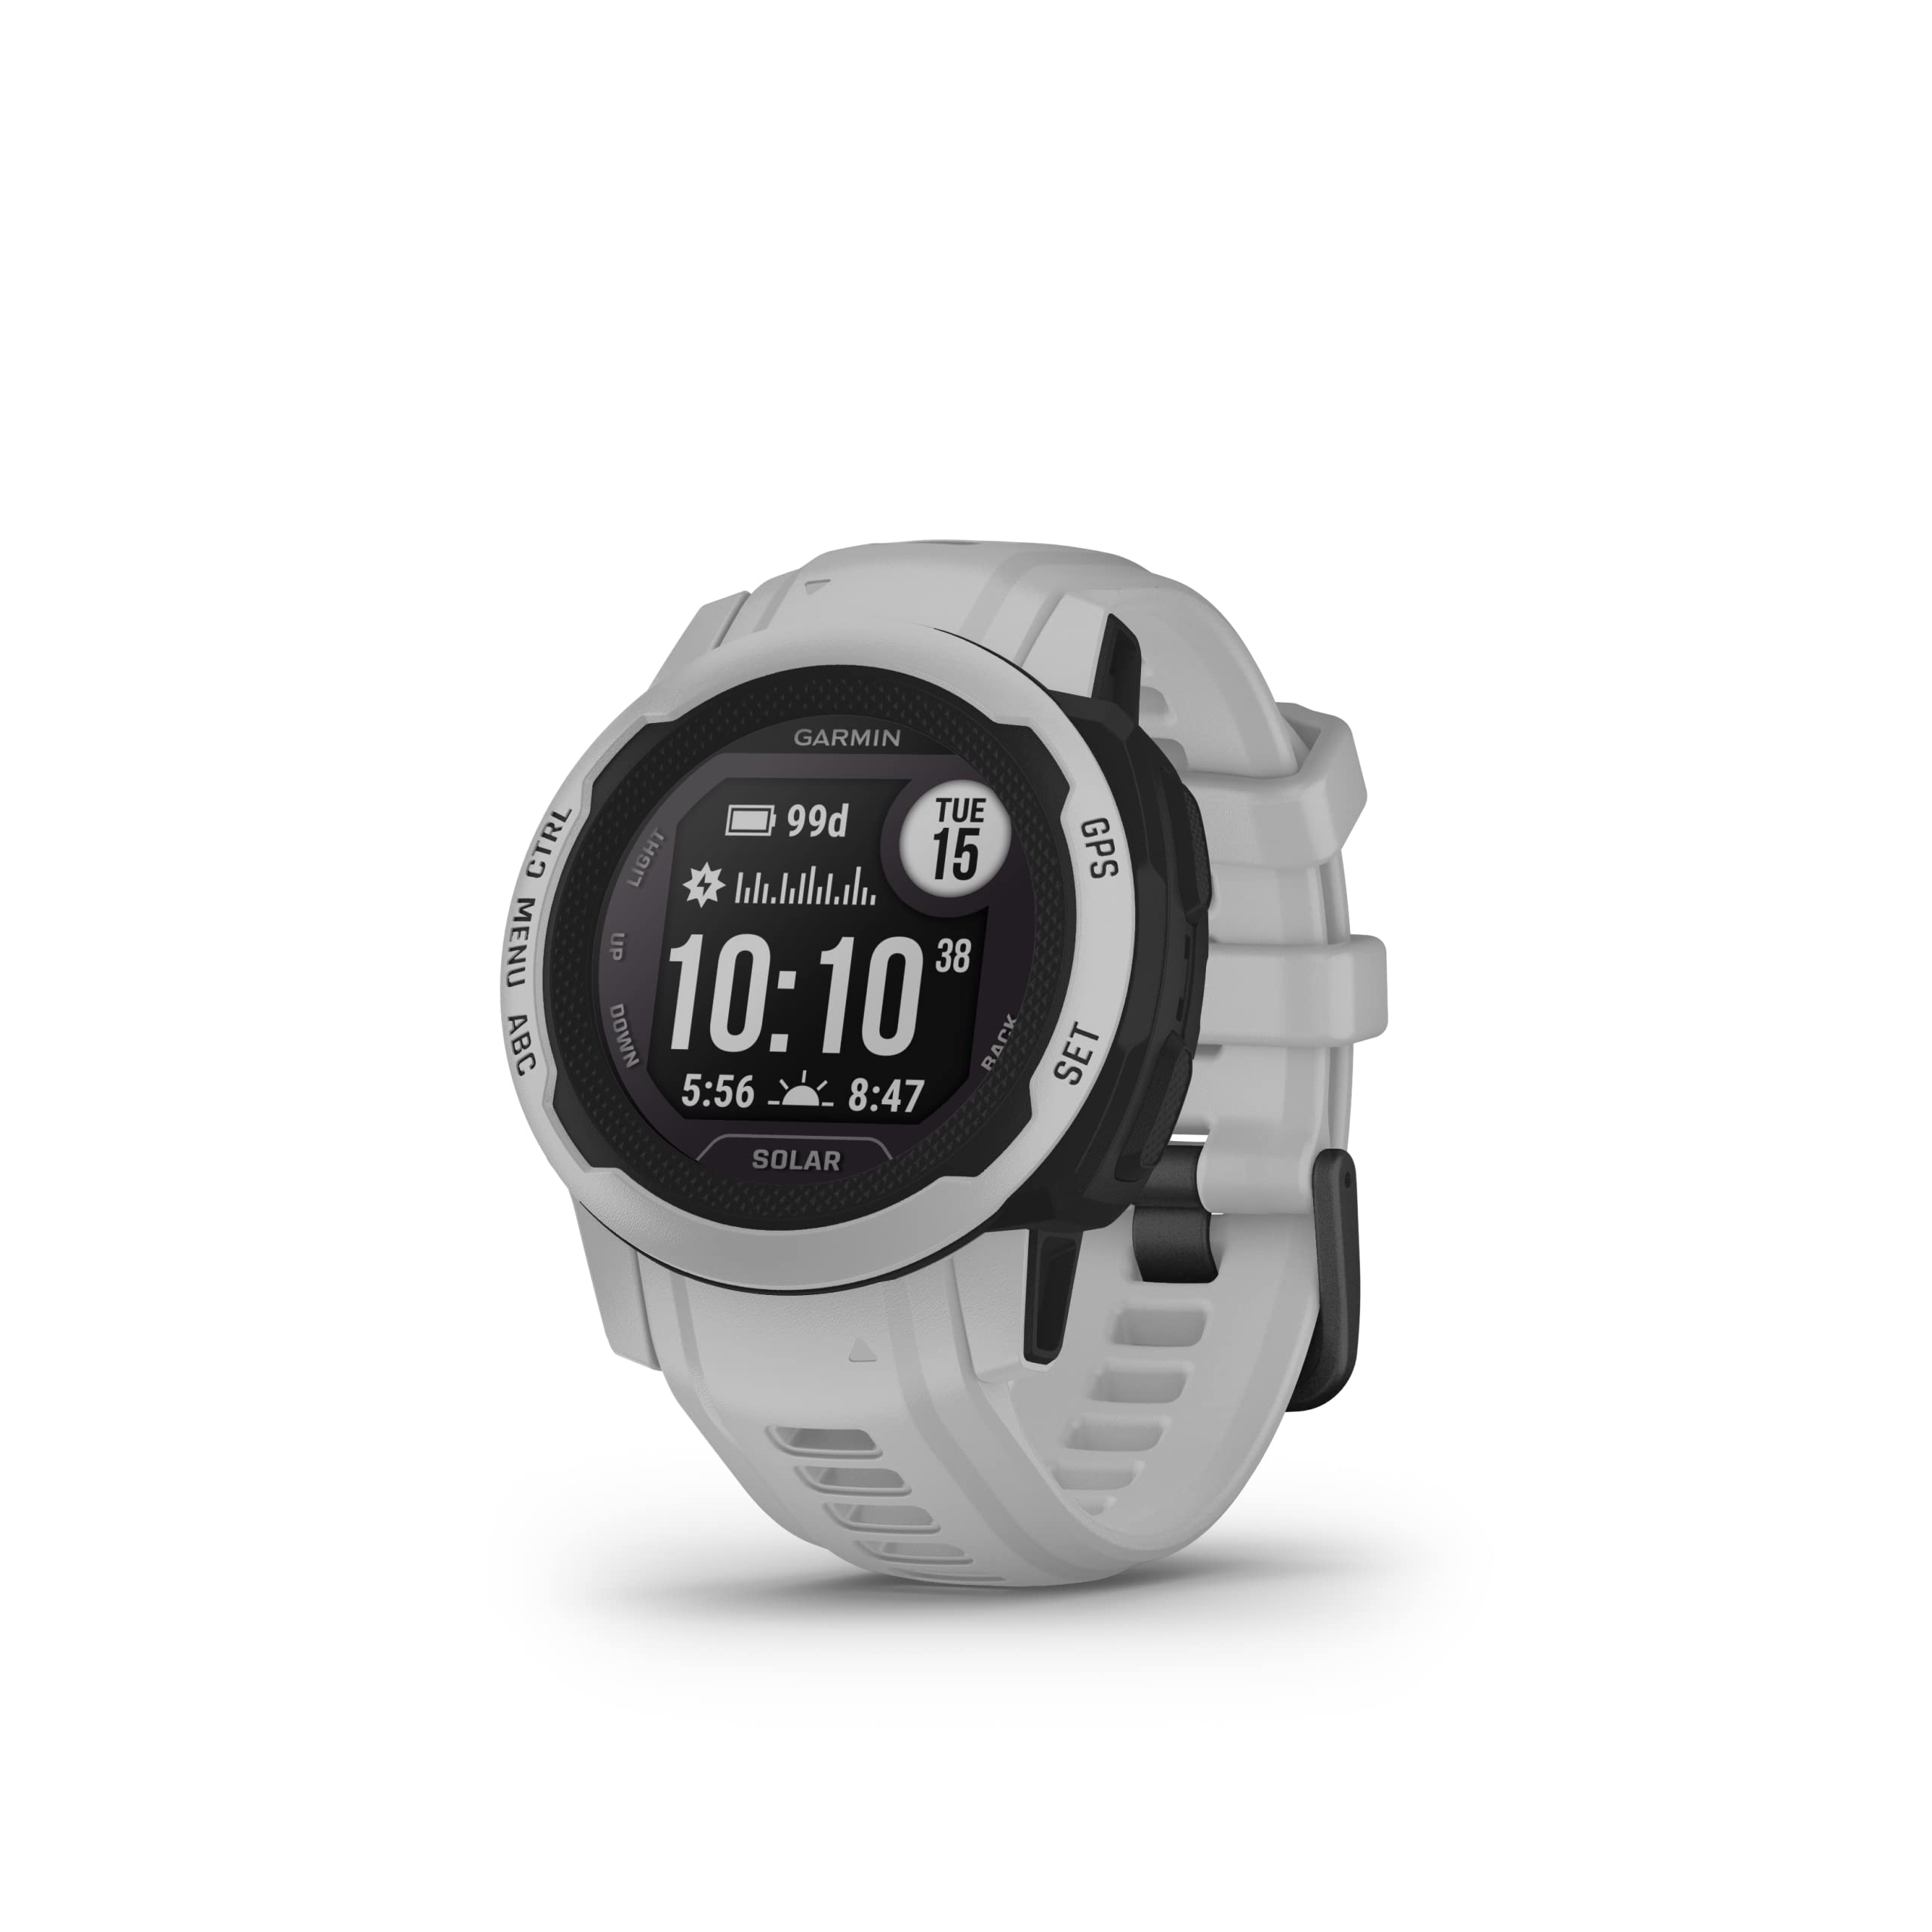 Garmin Instinct 2S Solar, Smaller-Sized GPS Outdoor Watch, Solar Charging Capabilities, Multi-GNSS Support, Tracback Routing, Mist Gray